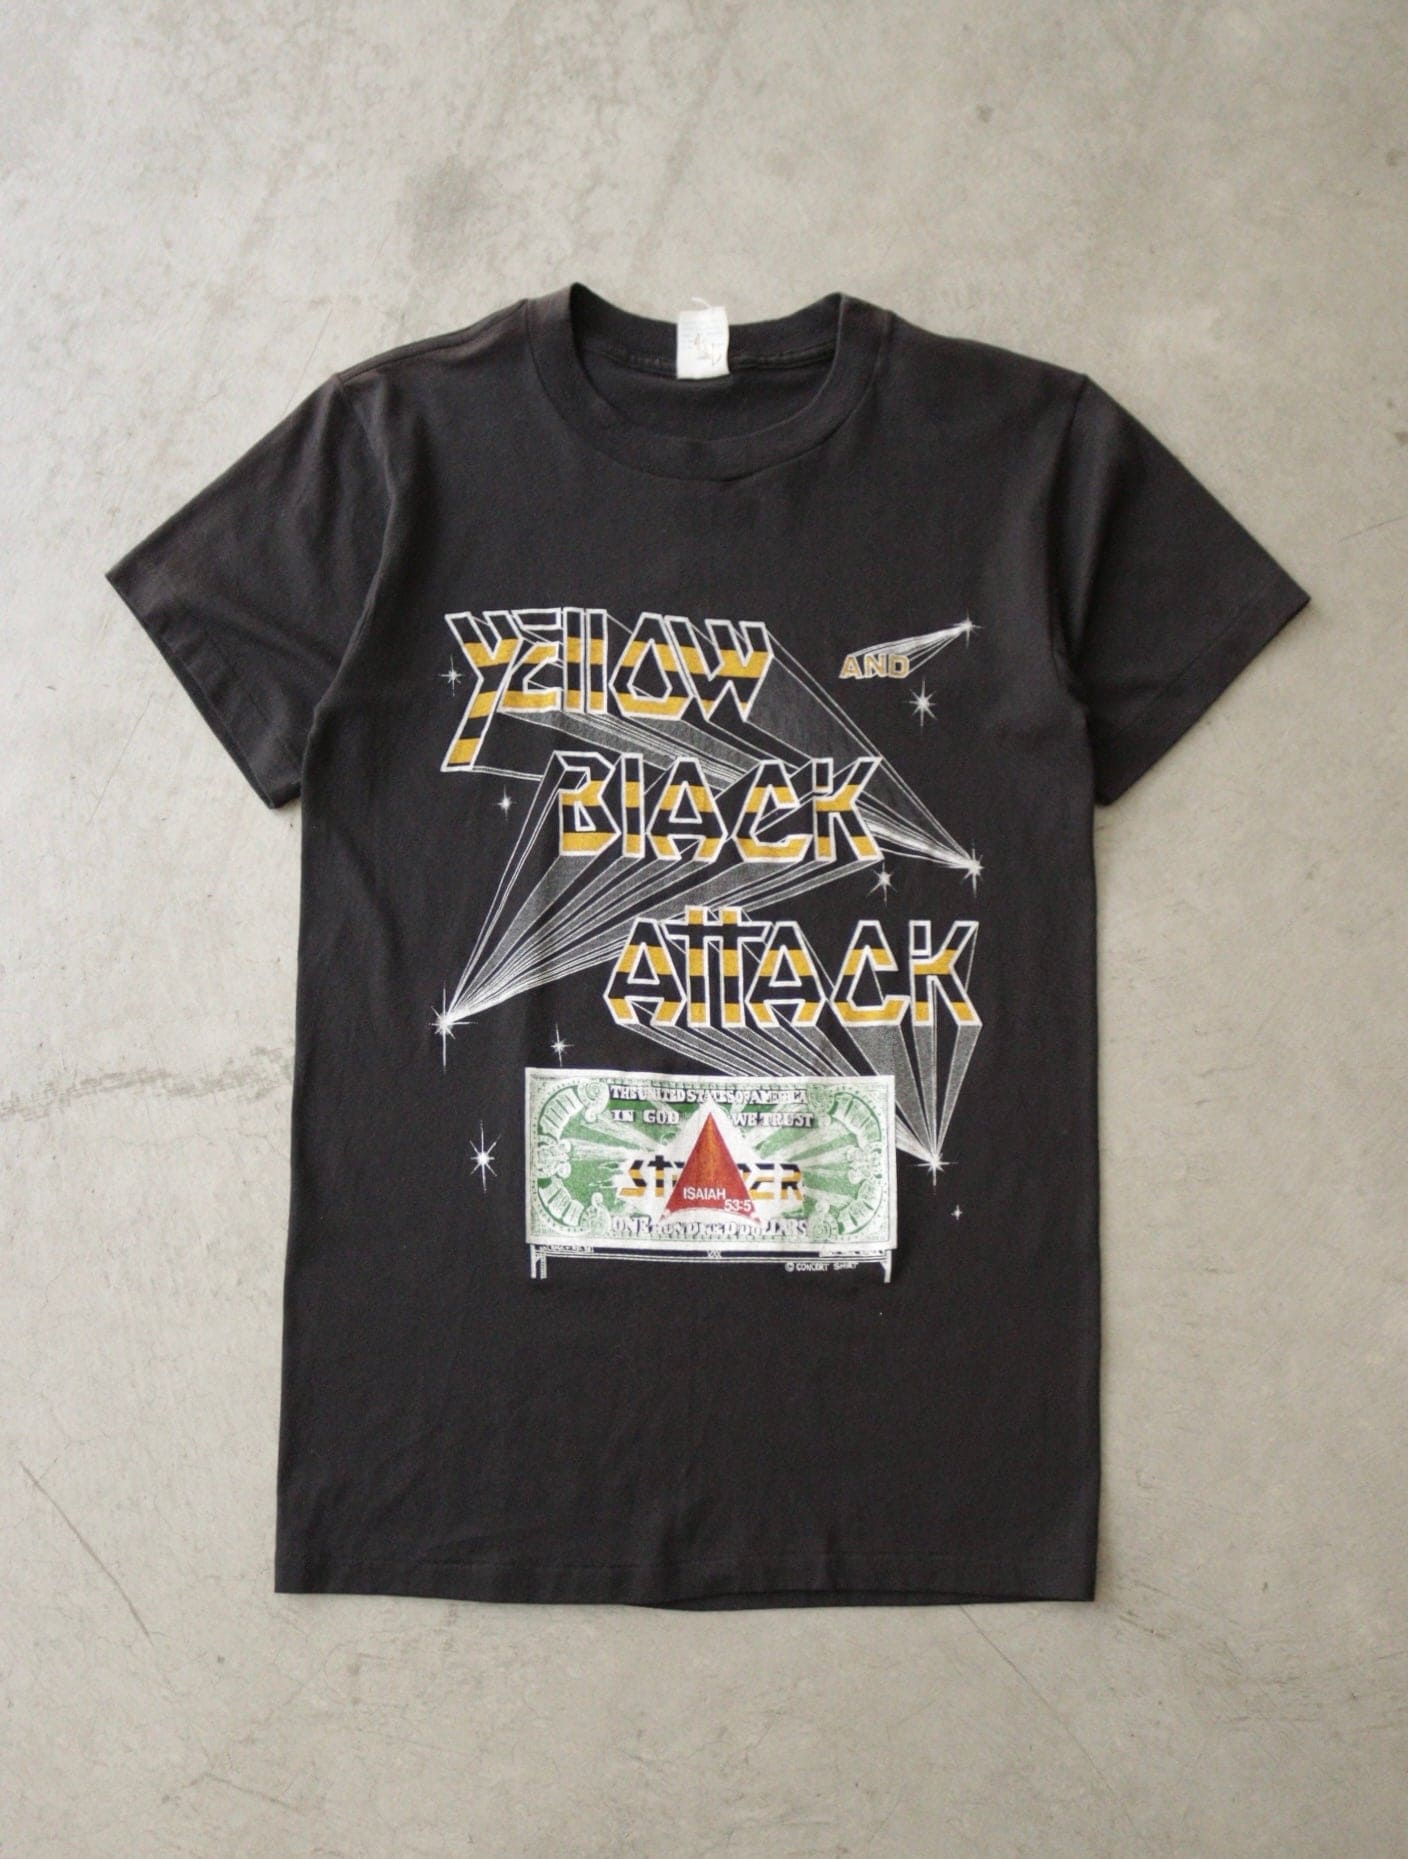 1980S STRYPER 'YELLOW BLACK ATTACK' BAND TEE